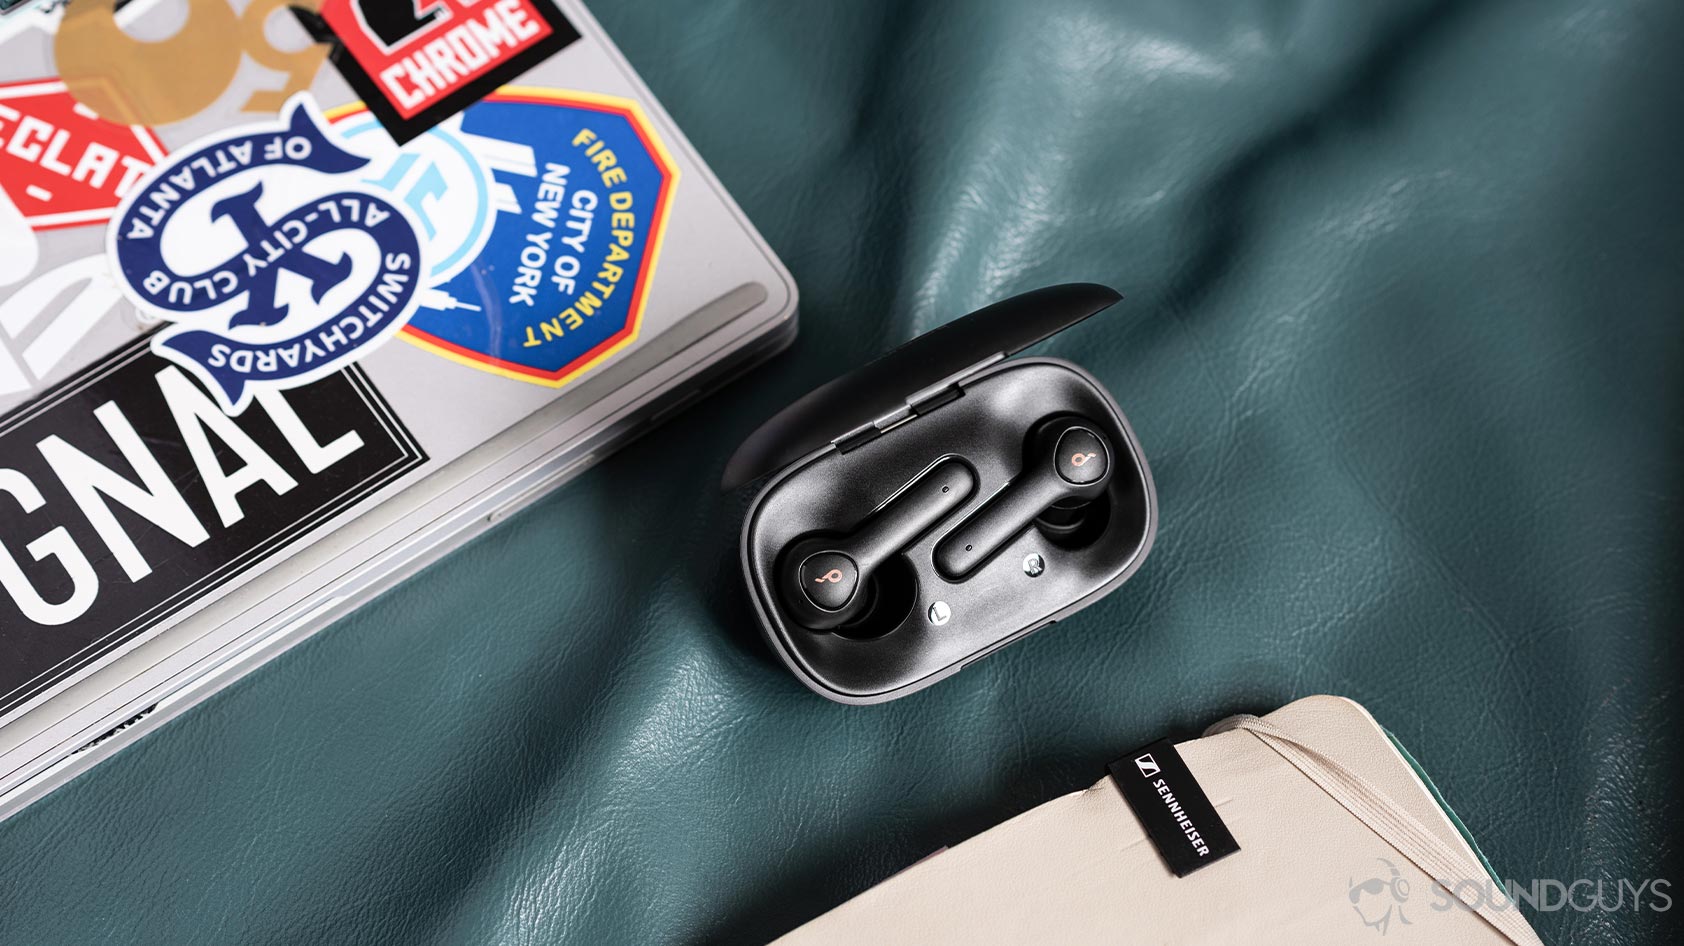 A picture of the Anker Soundcore Life P2 true wireless earbuds in the charging case.